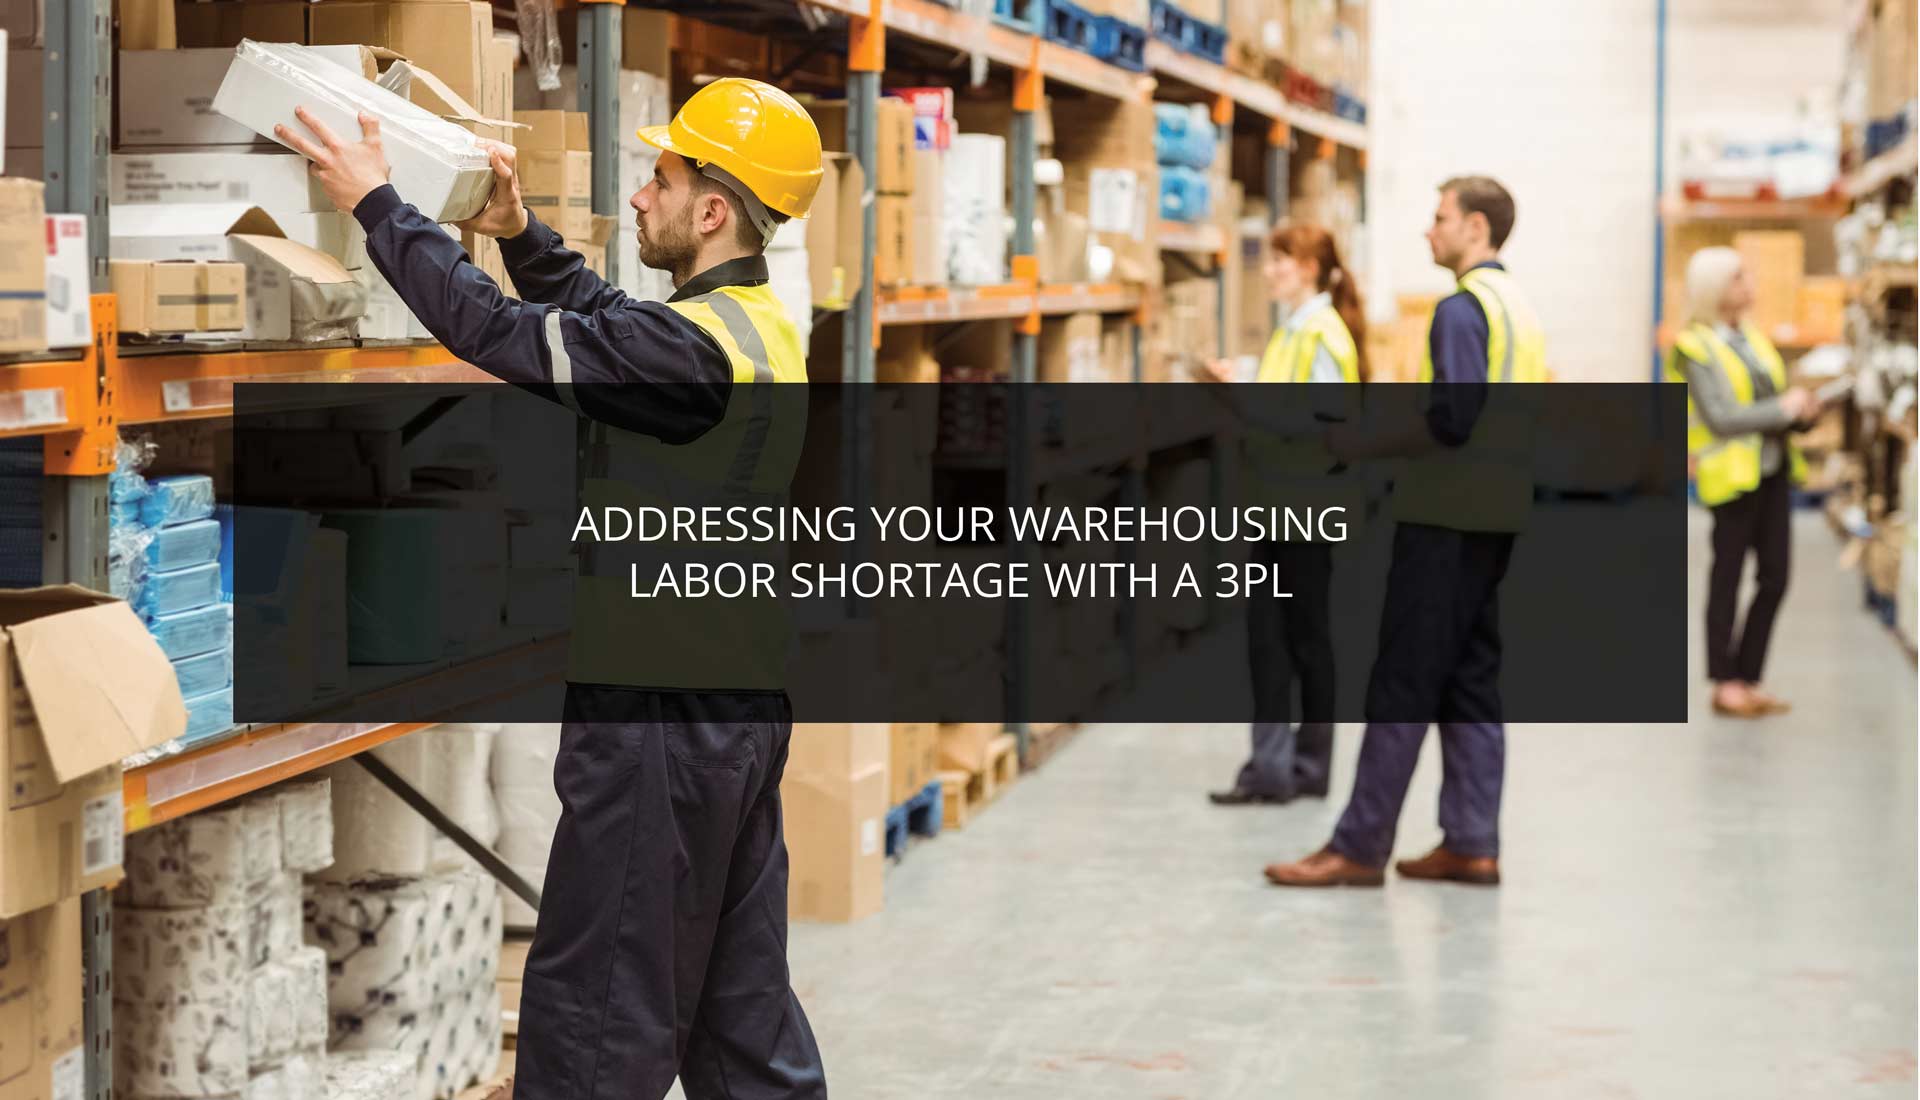 Addressing Your Warehousing Labor Shortage With a 3PL